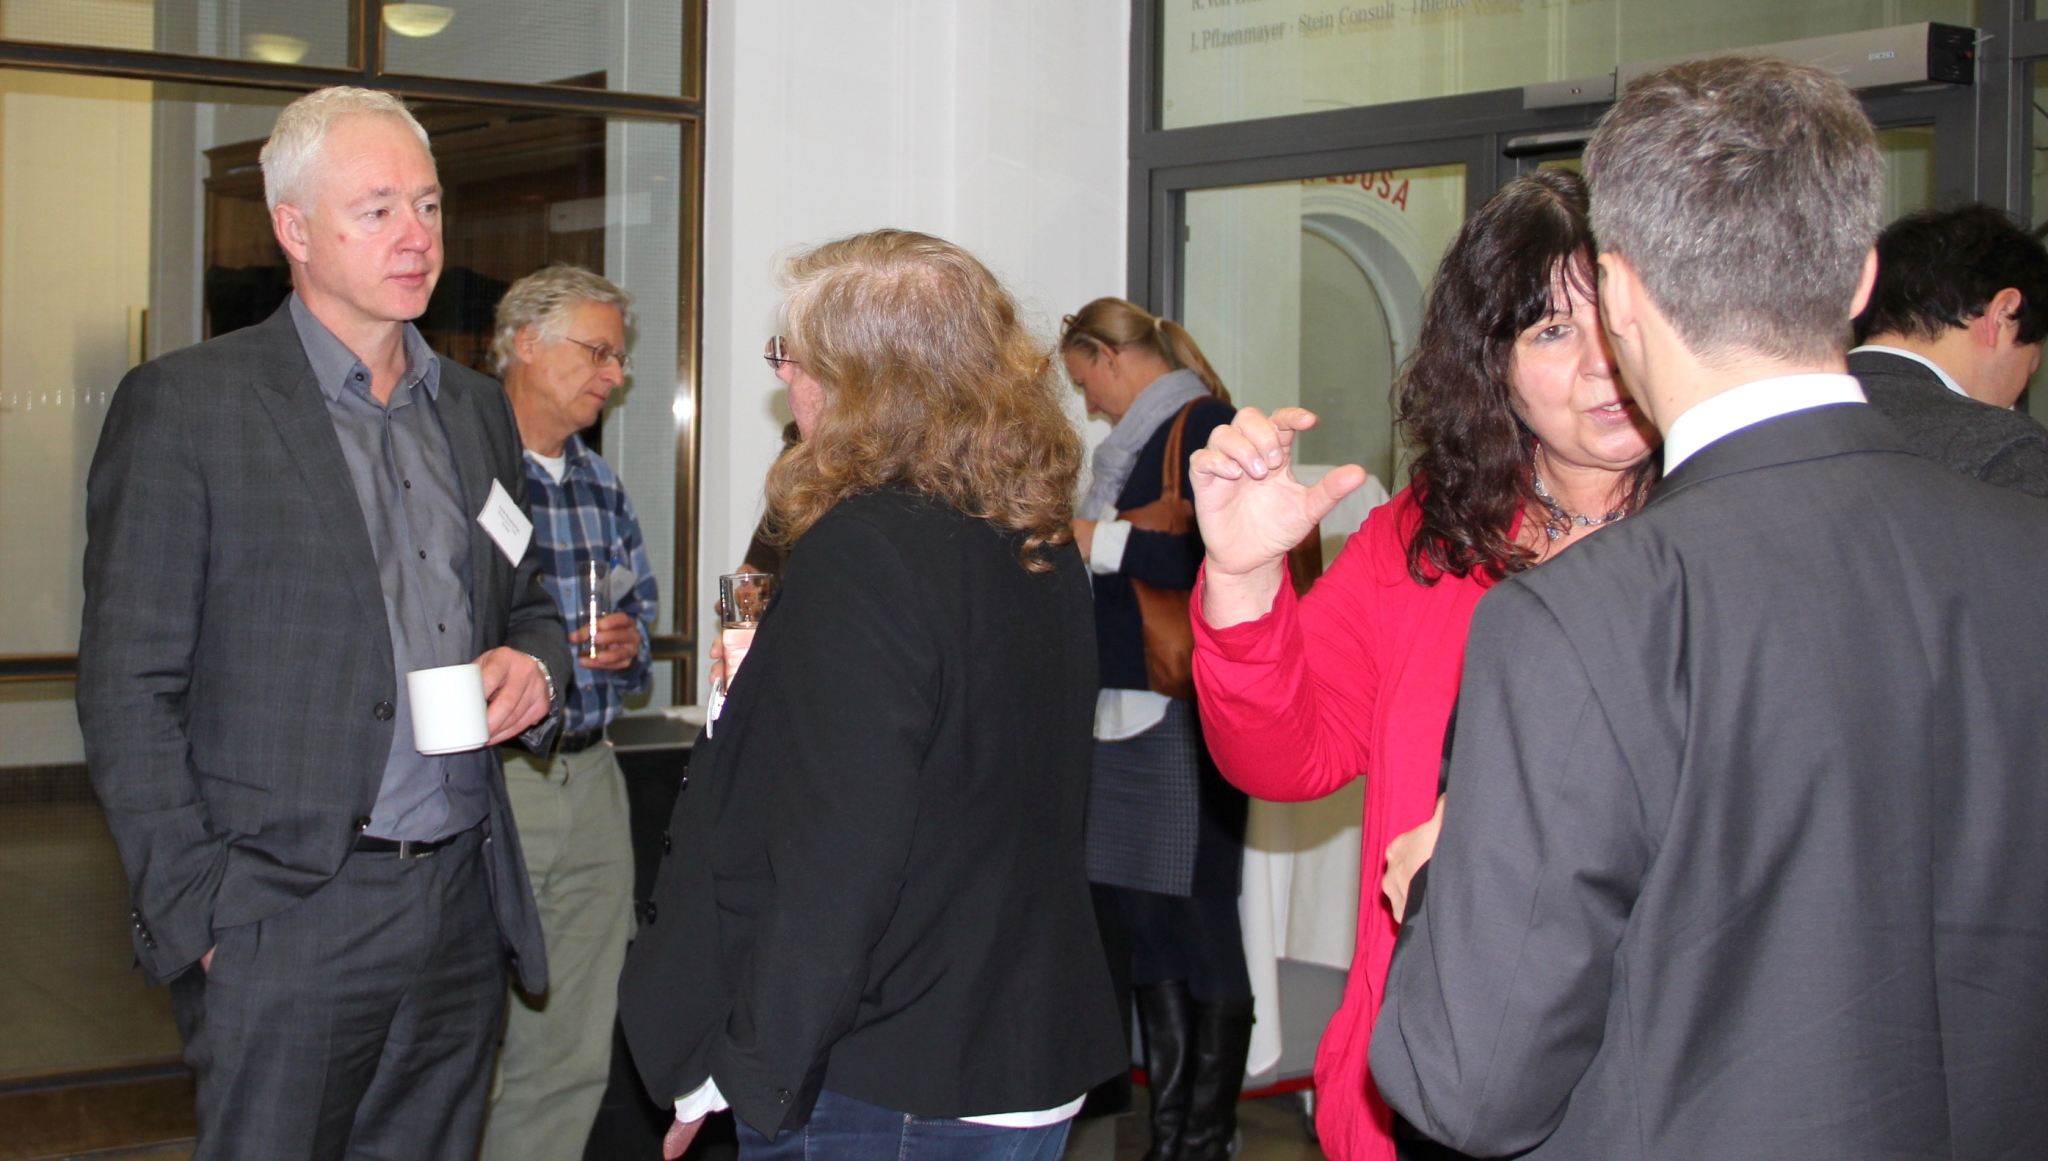 Some participants of the event engaged in networking activities.